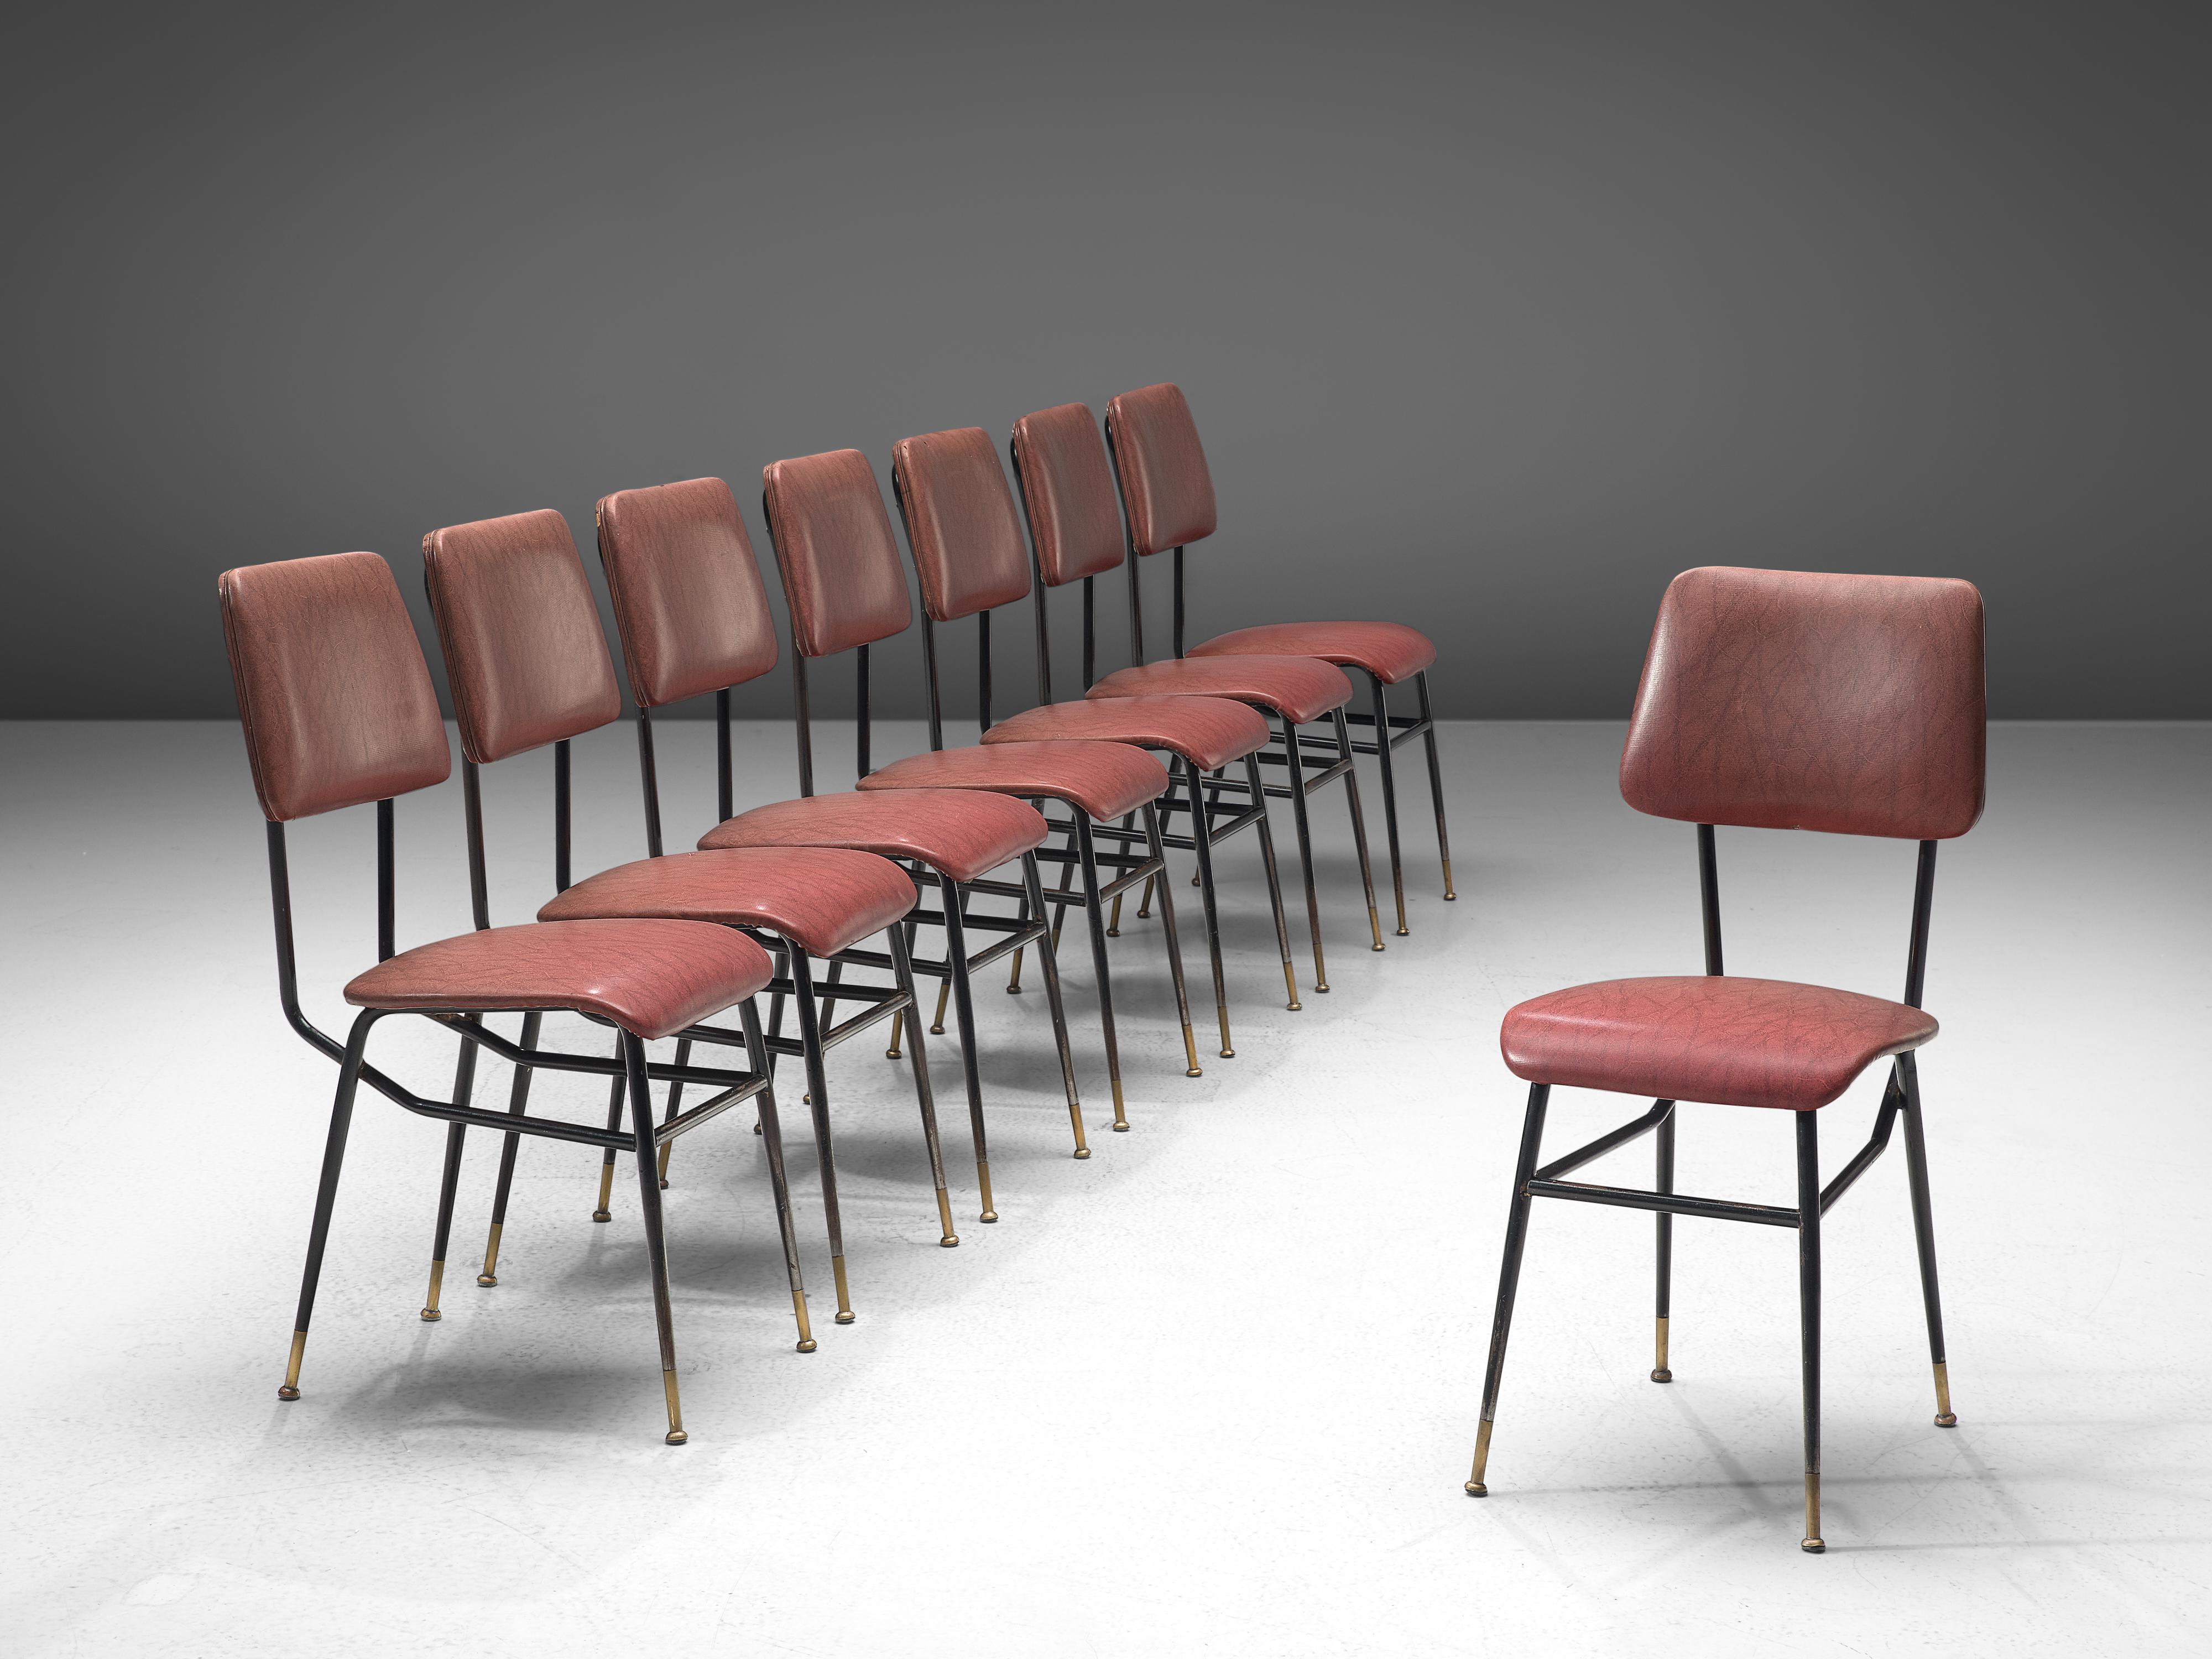 Studio architects BBPR (attributed), set of eight chairs, pink to red faux leather, metal, brass, Italy, 1950s

This set of eight chairs with varnished metal rod structure have strong features of Studio BBPR's designs, and therefore is attributed to